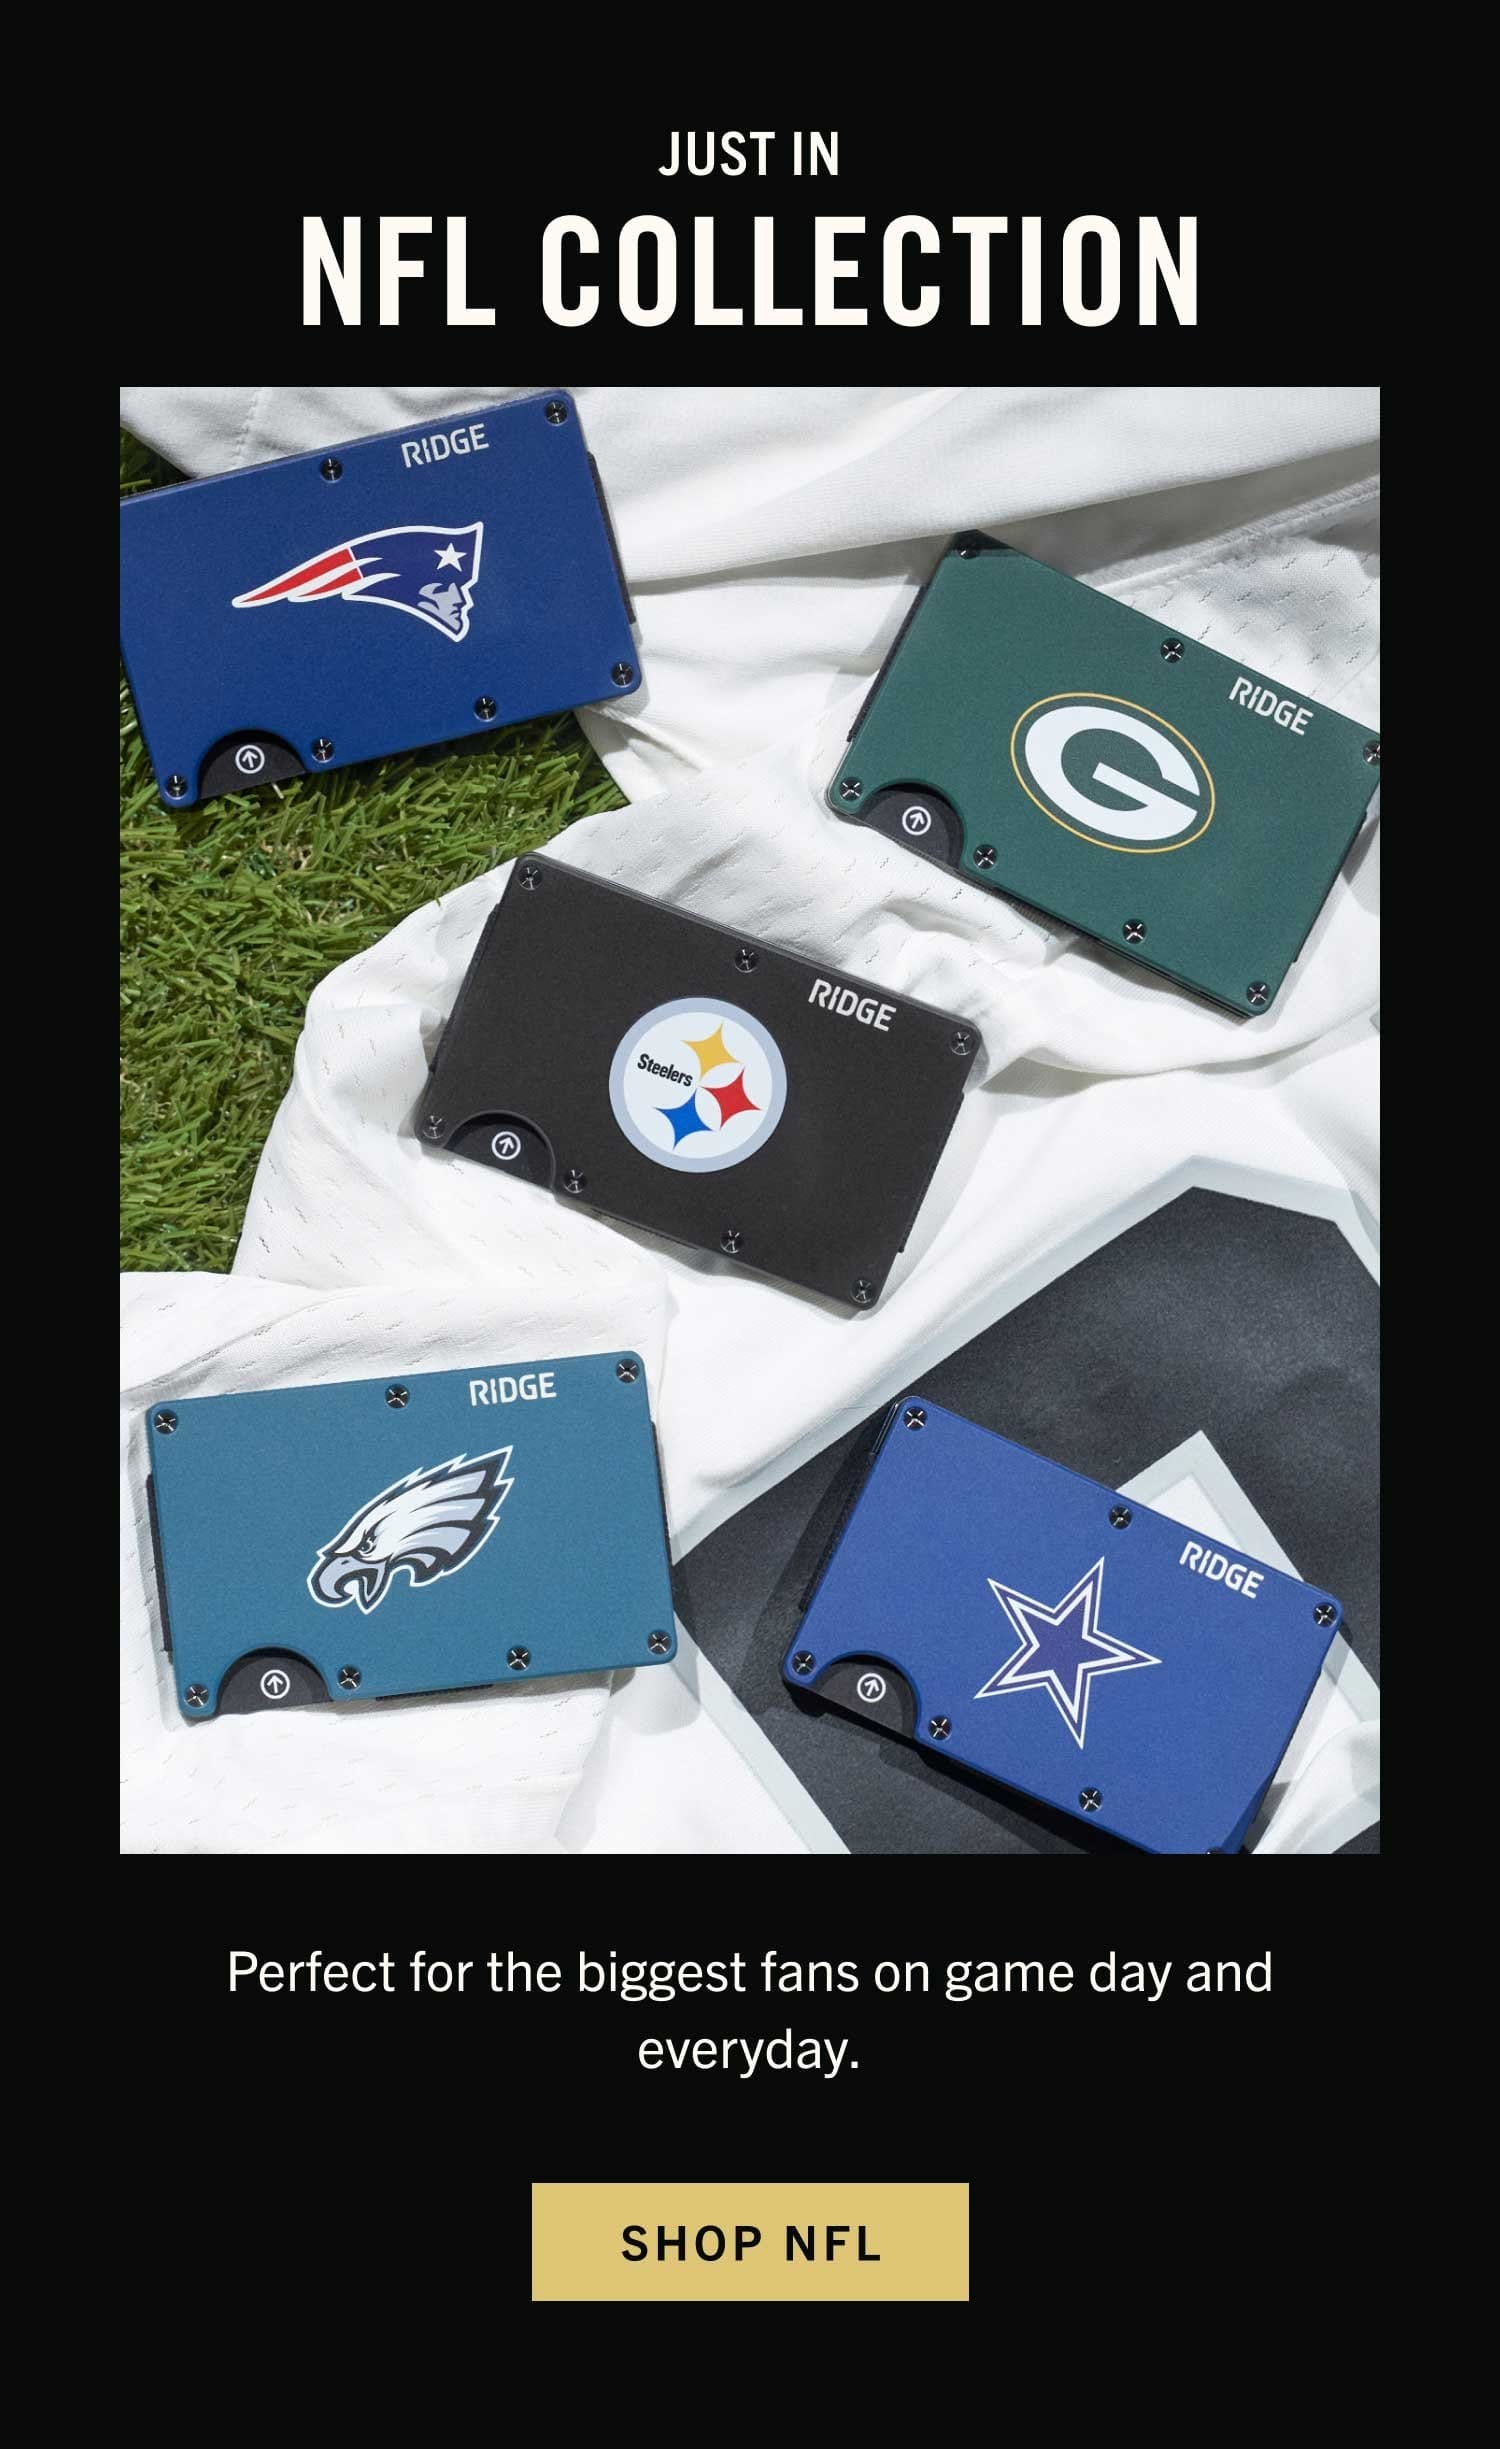 Just In NFL Colletion